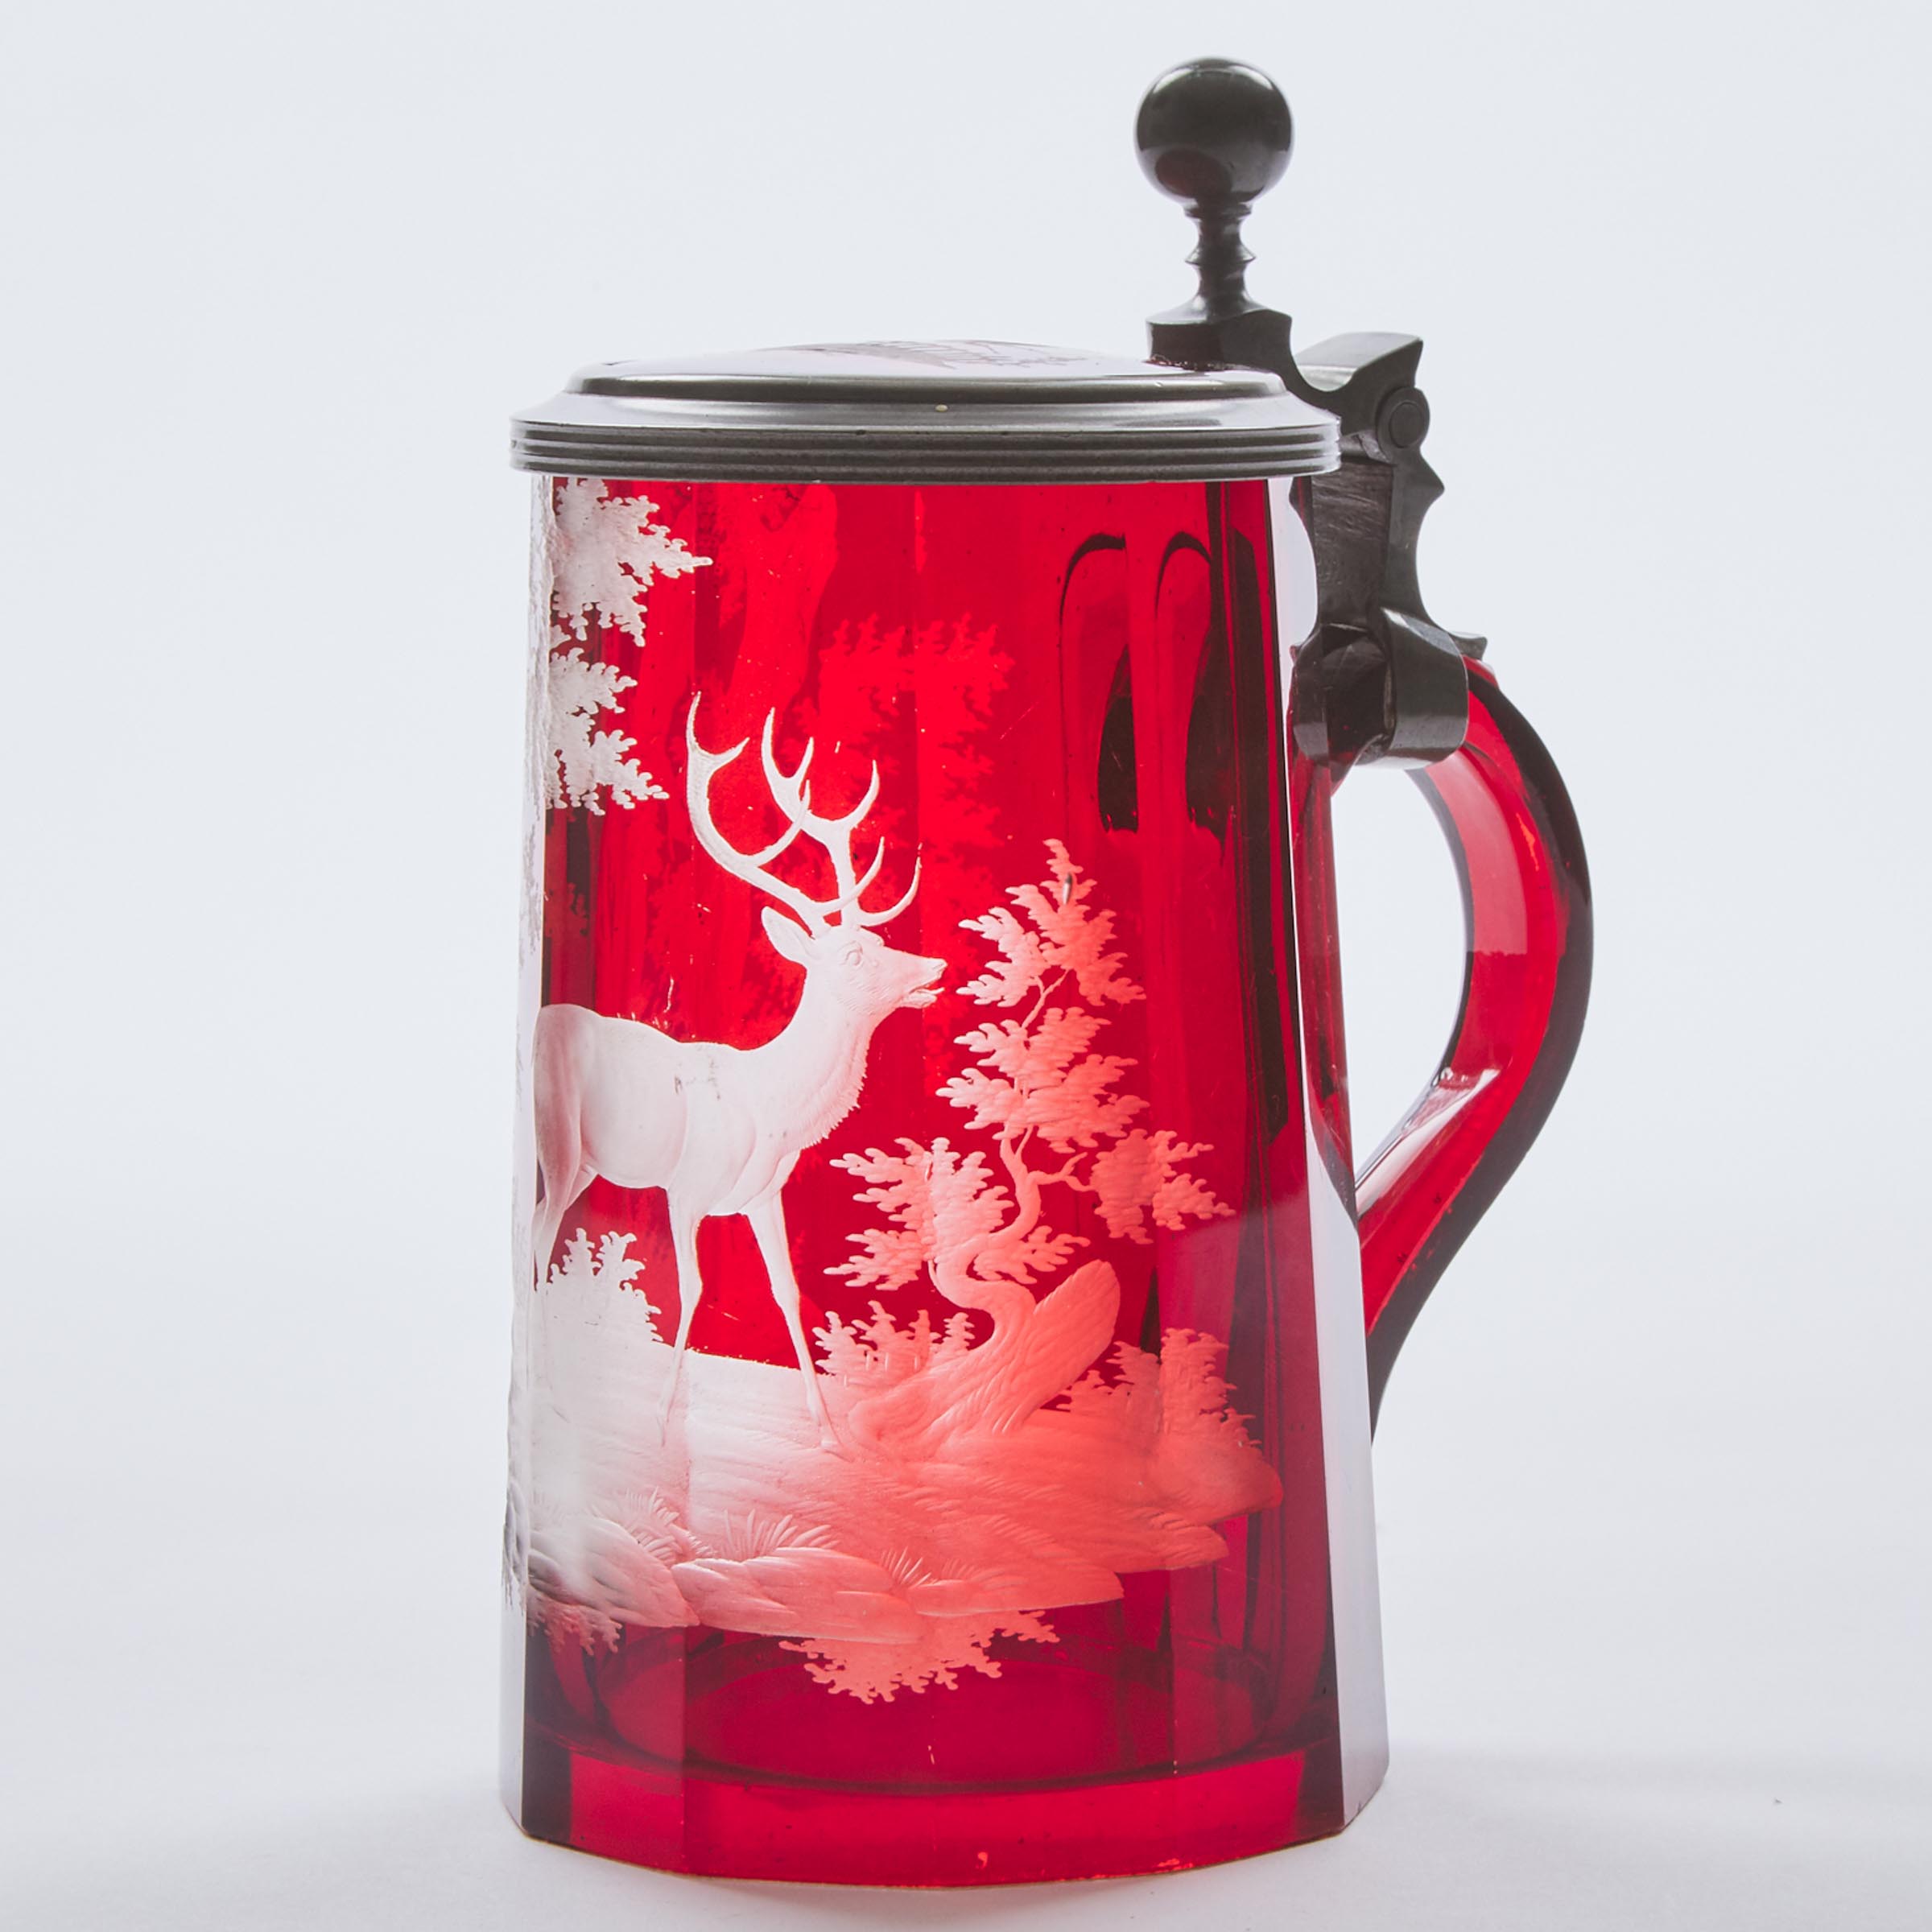 Bohemian Pewter Mounted Red Flashed and Engraved Glass Tankard, 19th century